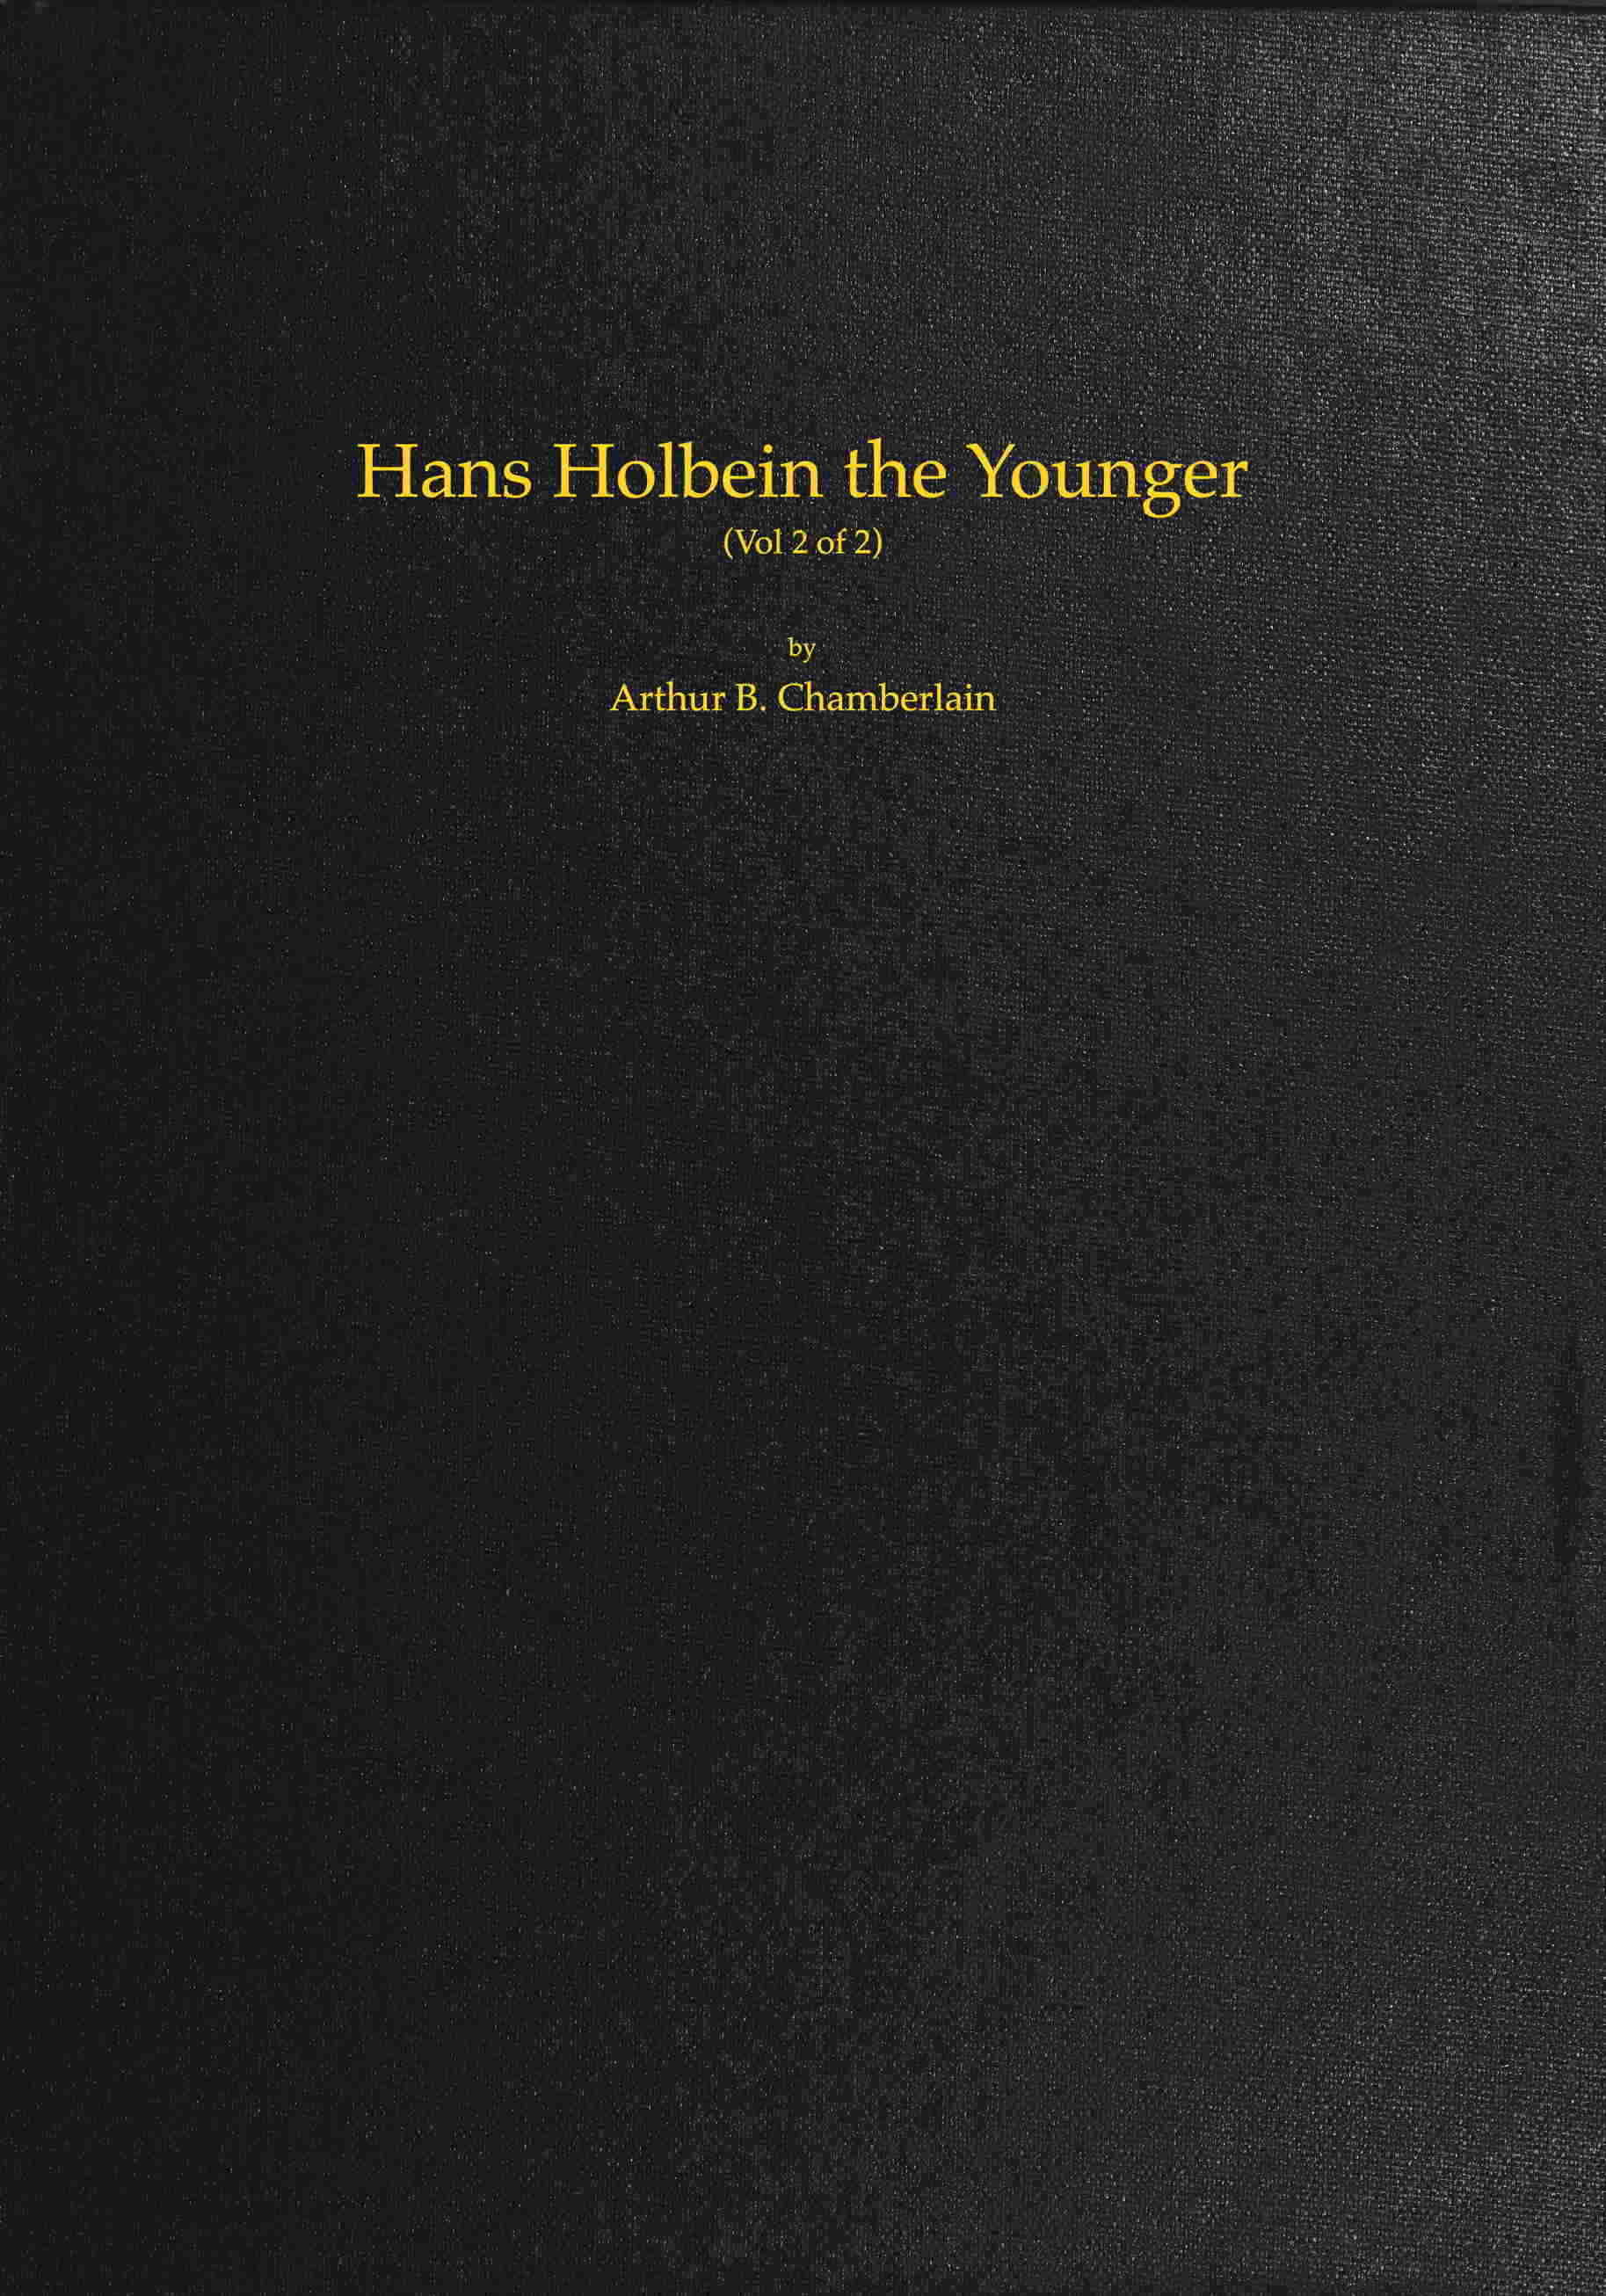 Hans Holbein the Younger, Volume 2 (of 2)